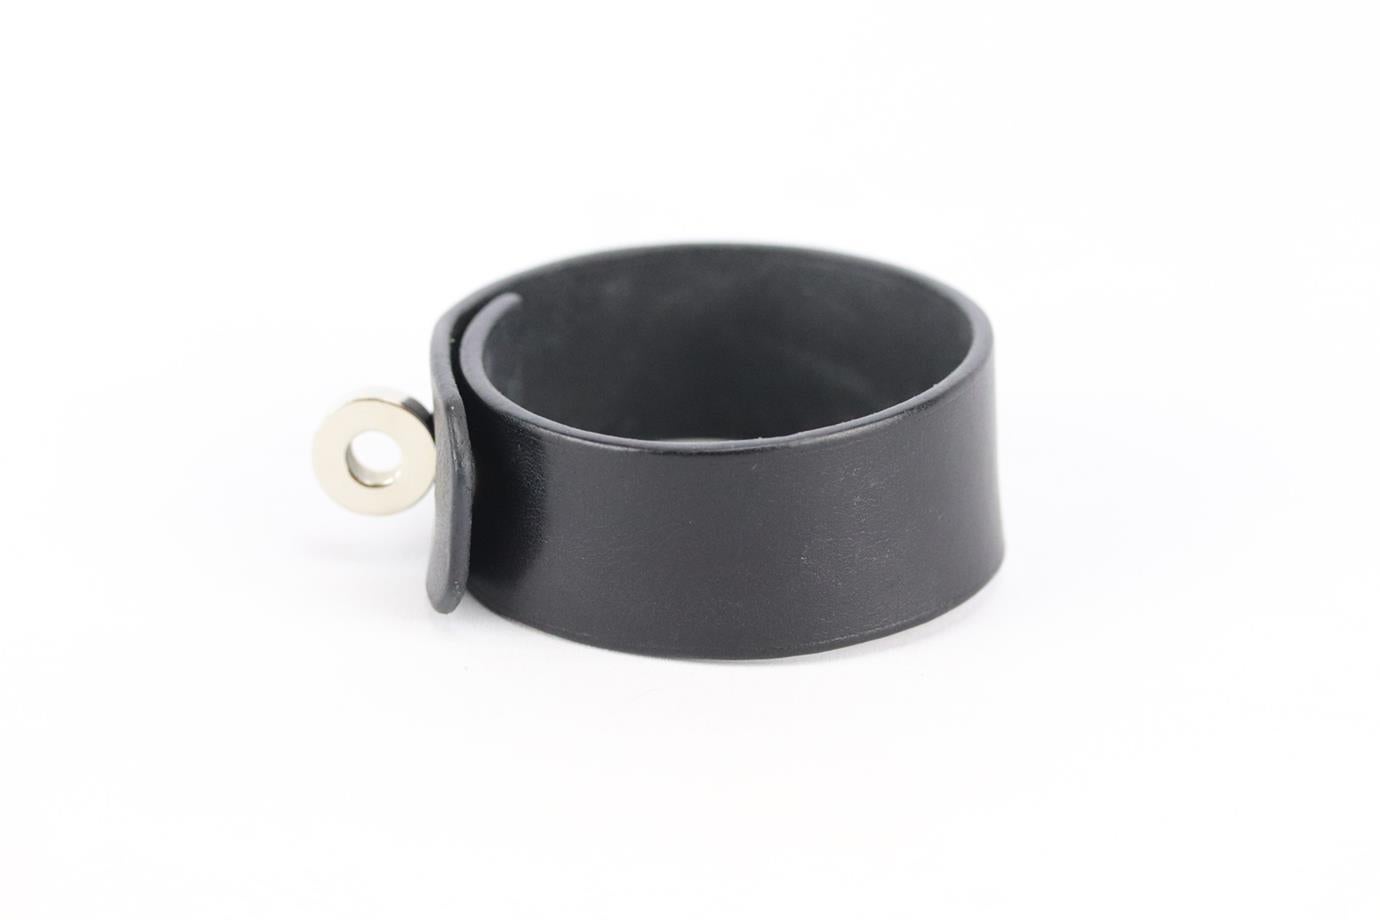 Hermès Hip Hop leather bracelet. Black. Twist lock fastening at front. Does not come with box or dustbag. Length: 9.1 in. Very good condition - Light signs of wear; see pictures.
